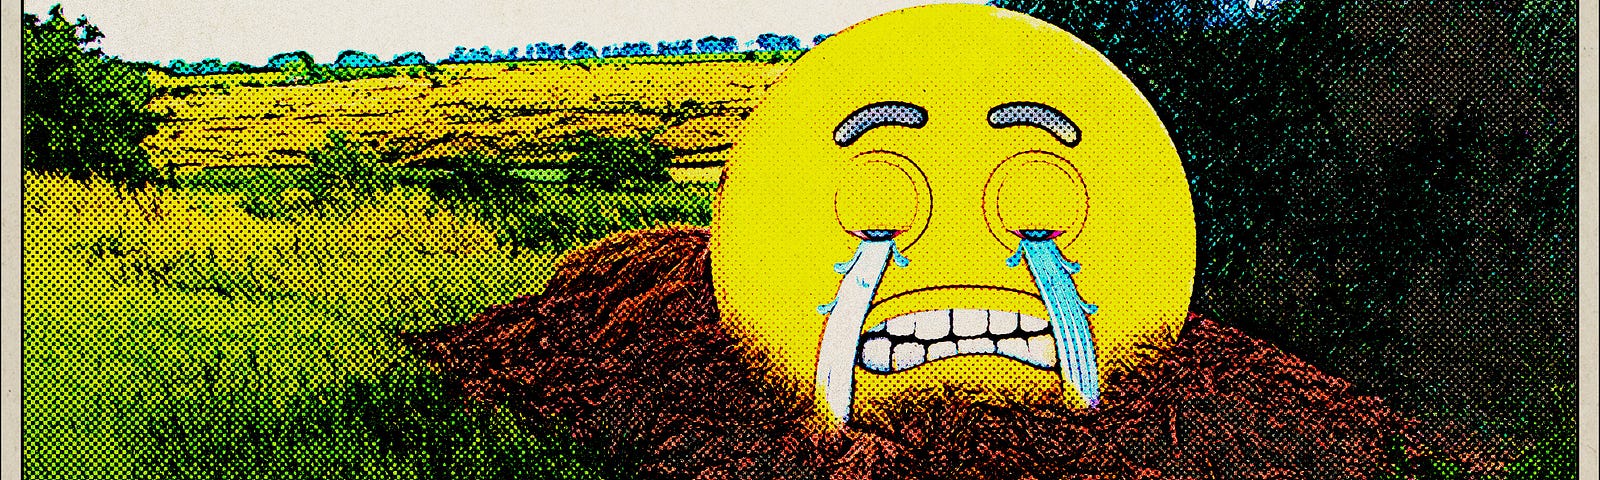 Crying emoticon stuck in shit pile